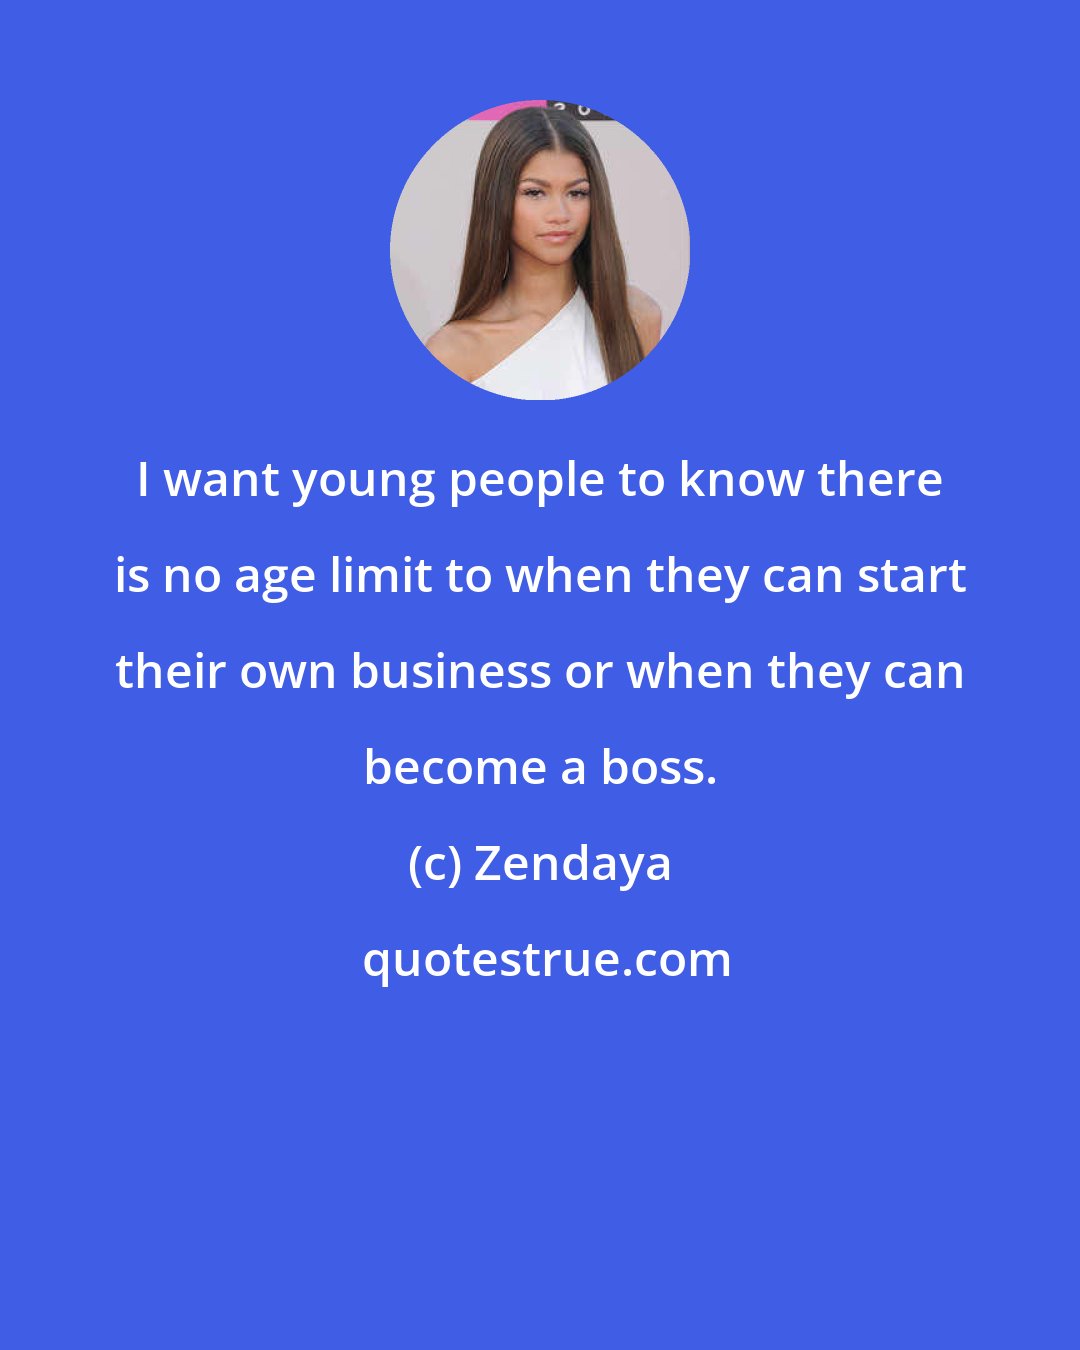 Zendaya: I want young people to know there is no age limit to when they can start their own business or when they can become a boss.